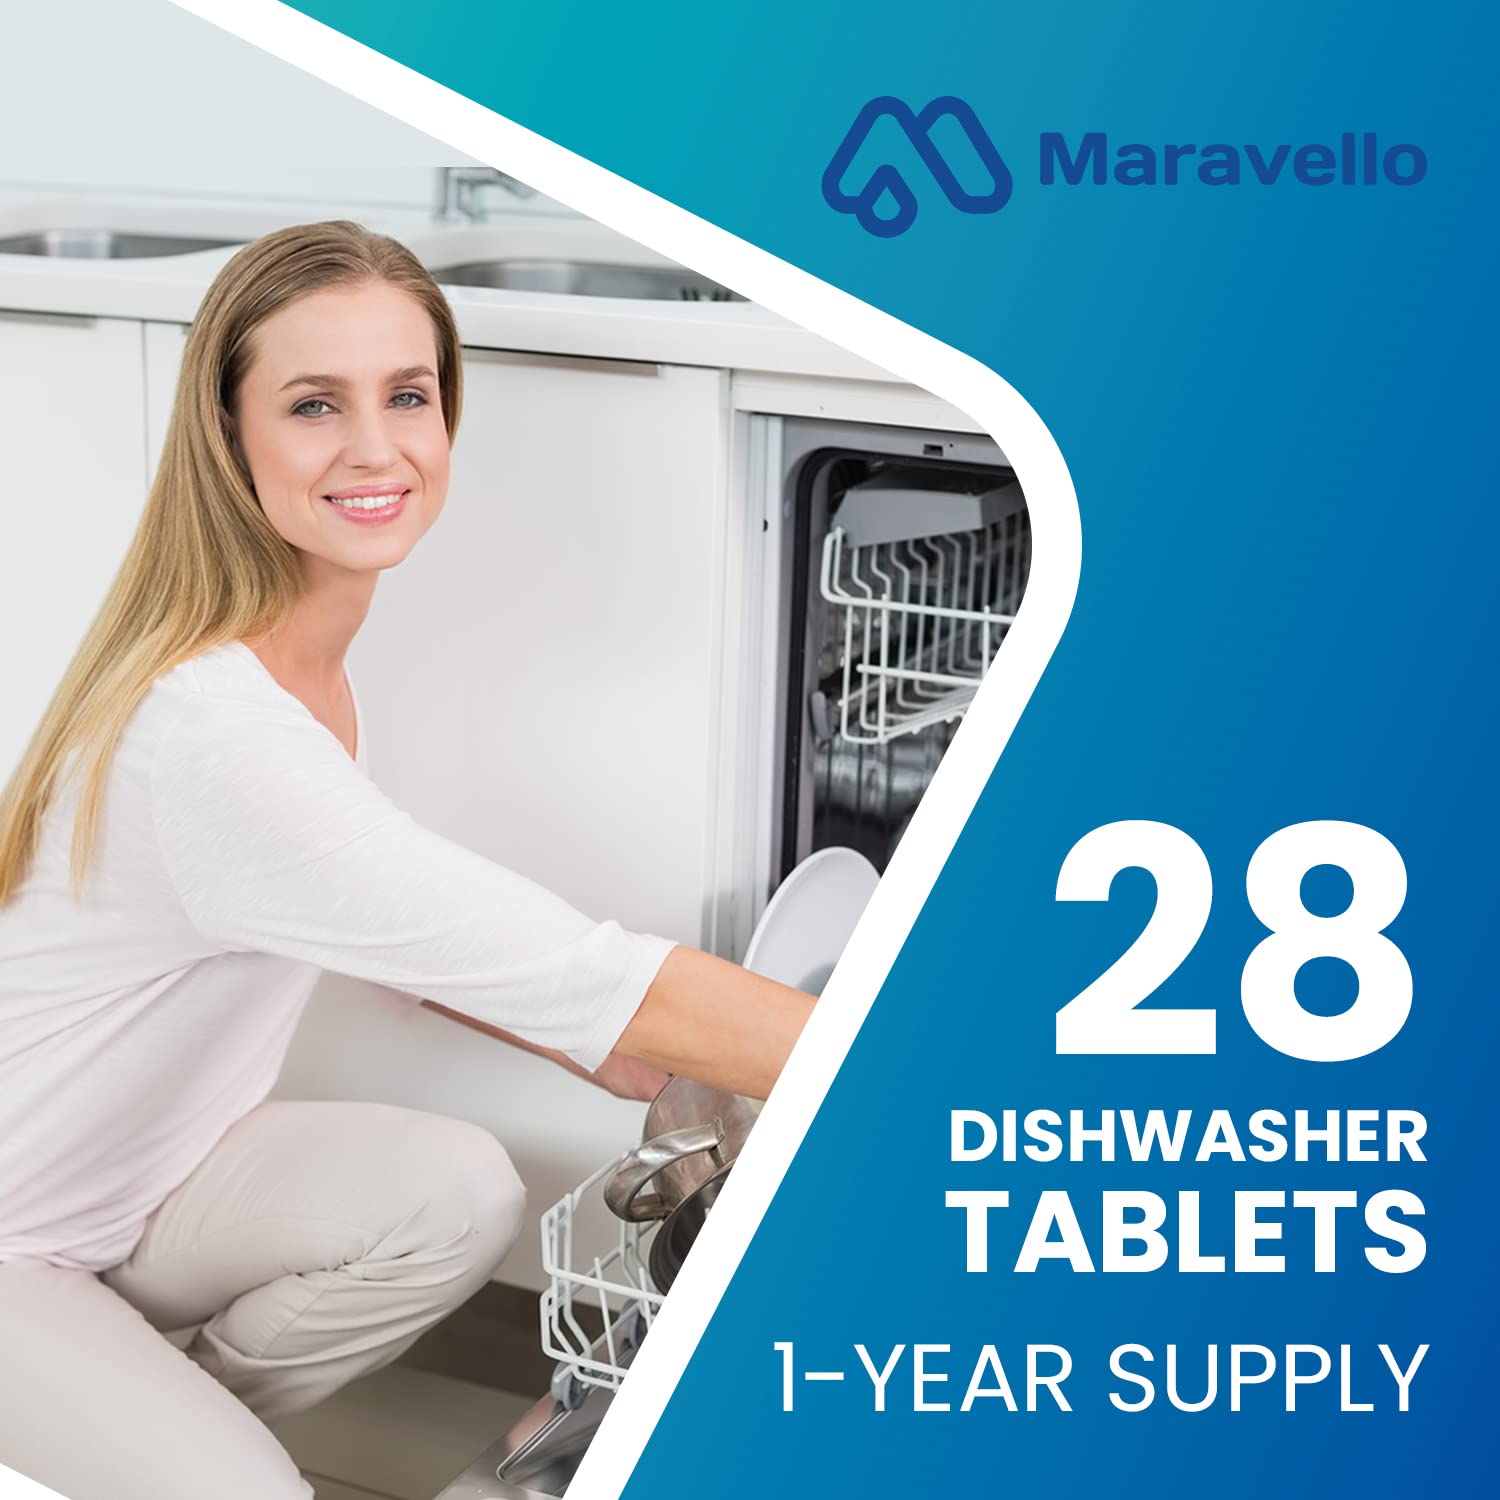 Maravello Dishwasher Cleaner And Deodorizer, Extra Clean Dishwasher Tablets, Remove Limescale, Grease and Odor, Septic Tank Safe- 28 Tablets, 12 Months Supply